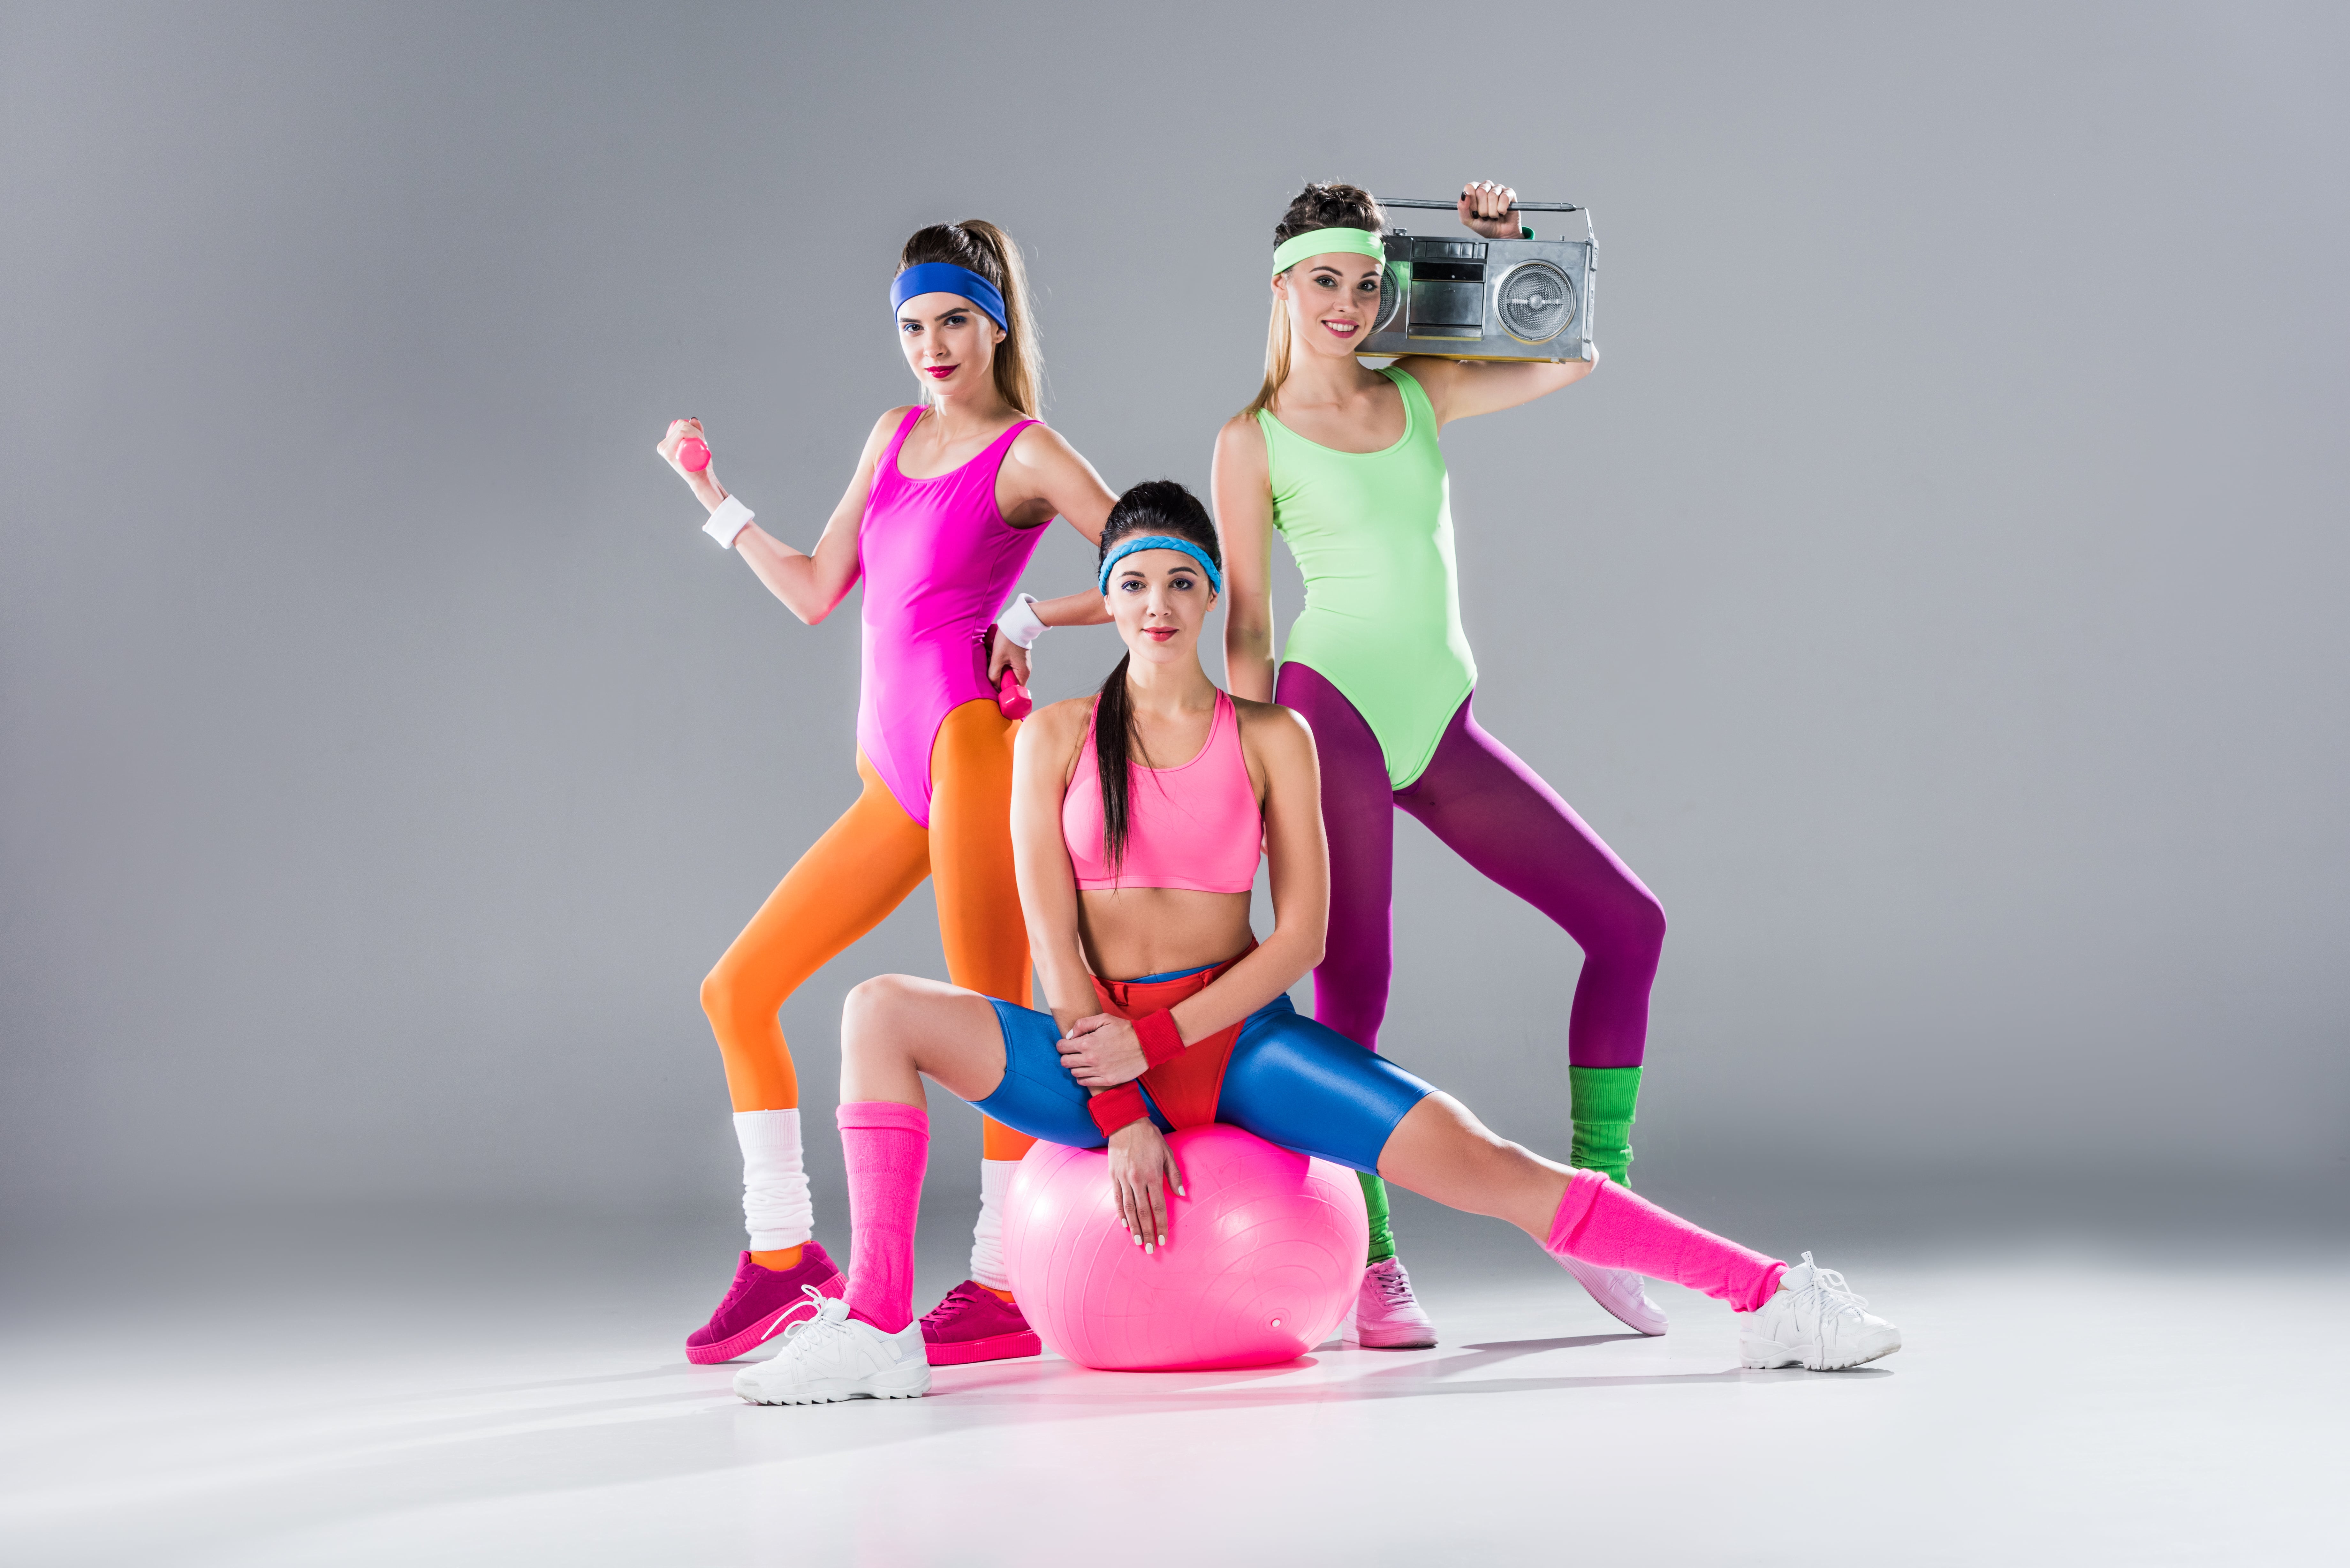 Easy '80s Workout Costumes That Are Both Comfy and Nostalgic